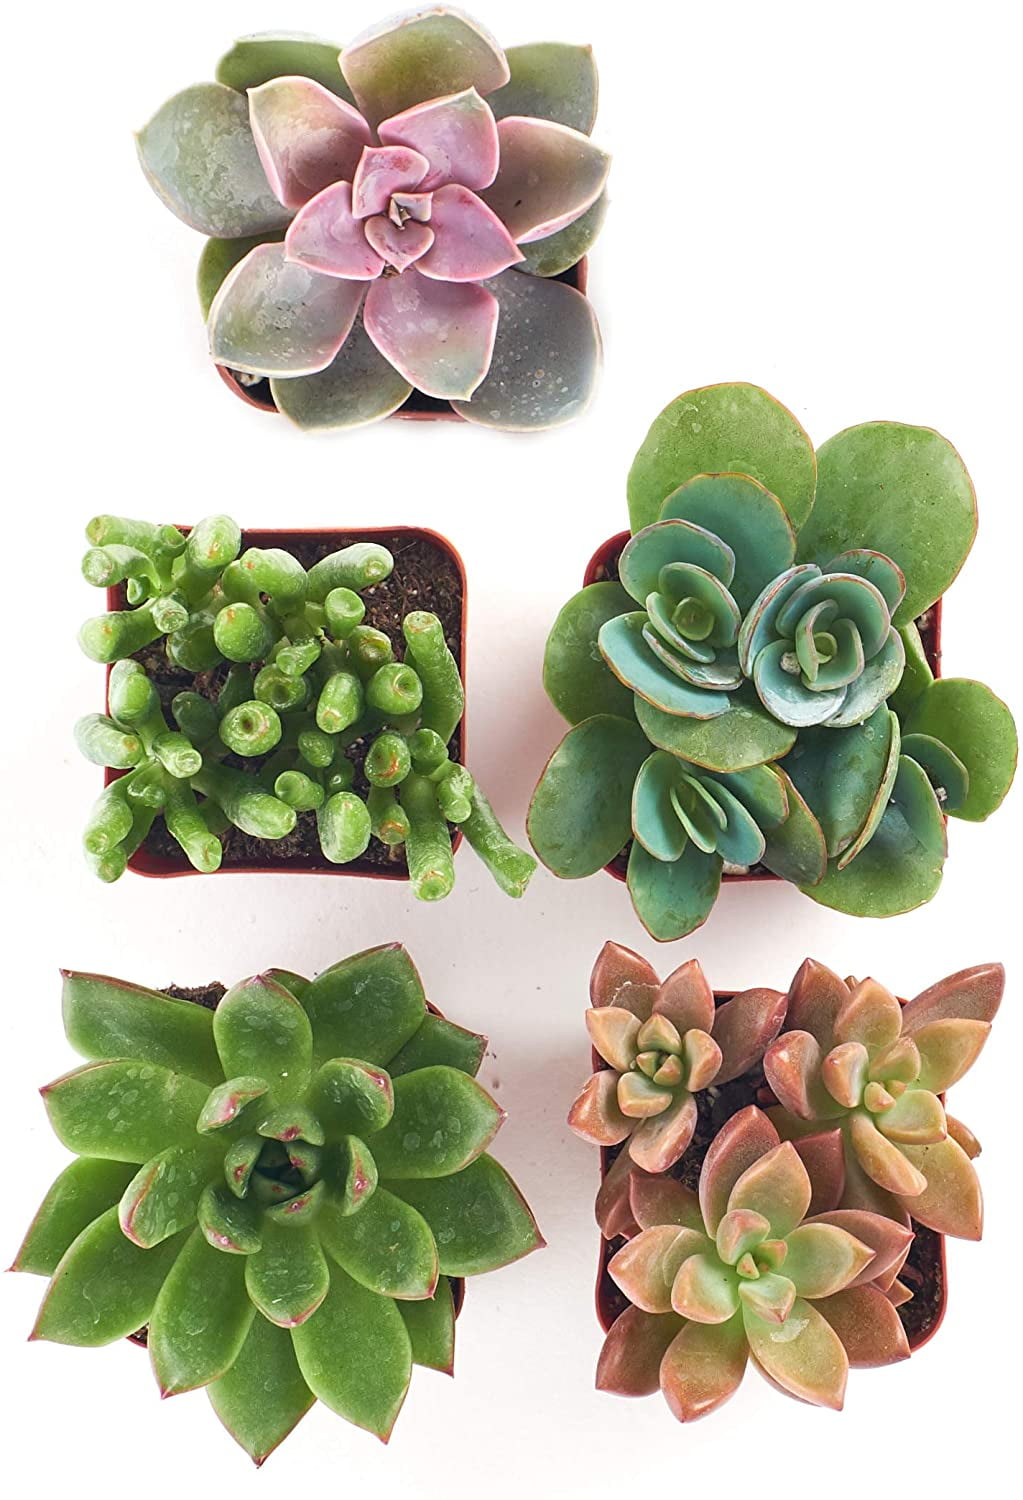 Leaf & Linen Variety Set of Hand Selected 2 INCH Fully Rooted Live Indoor Succulent Plants Assorted Collection 6-Pack 